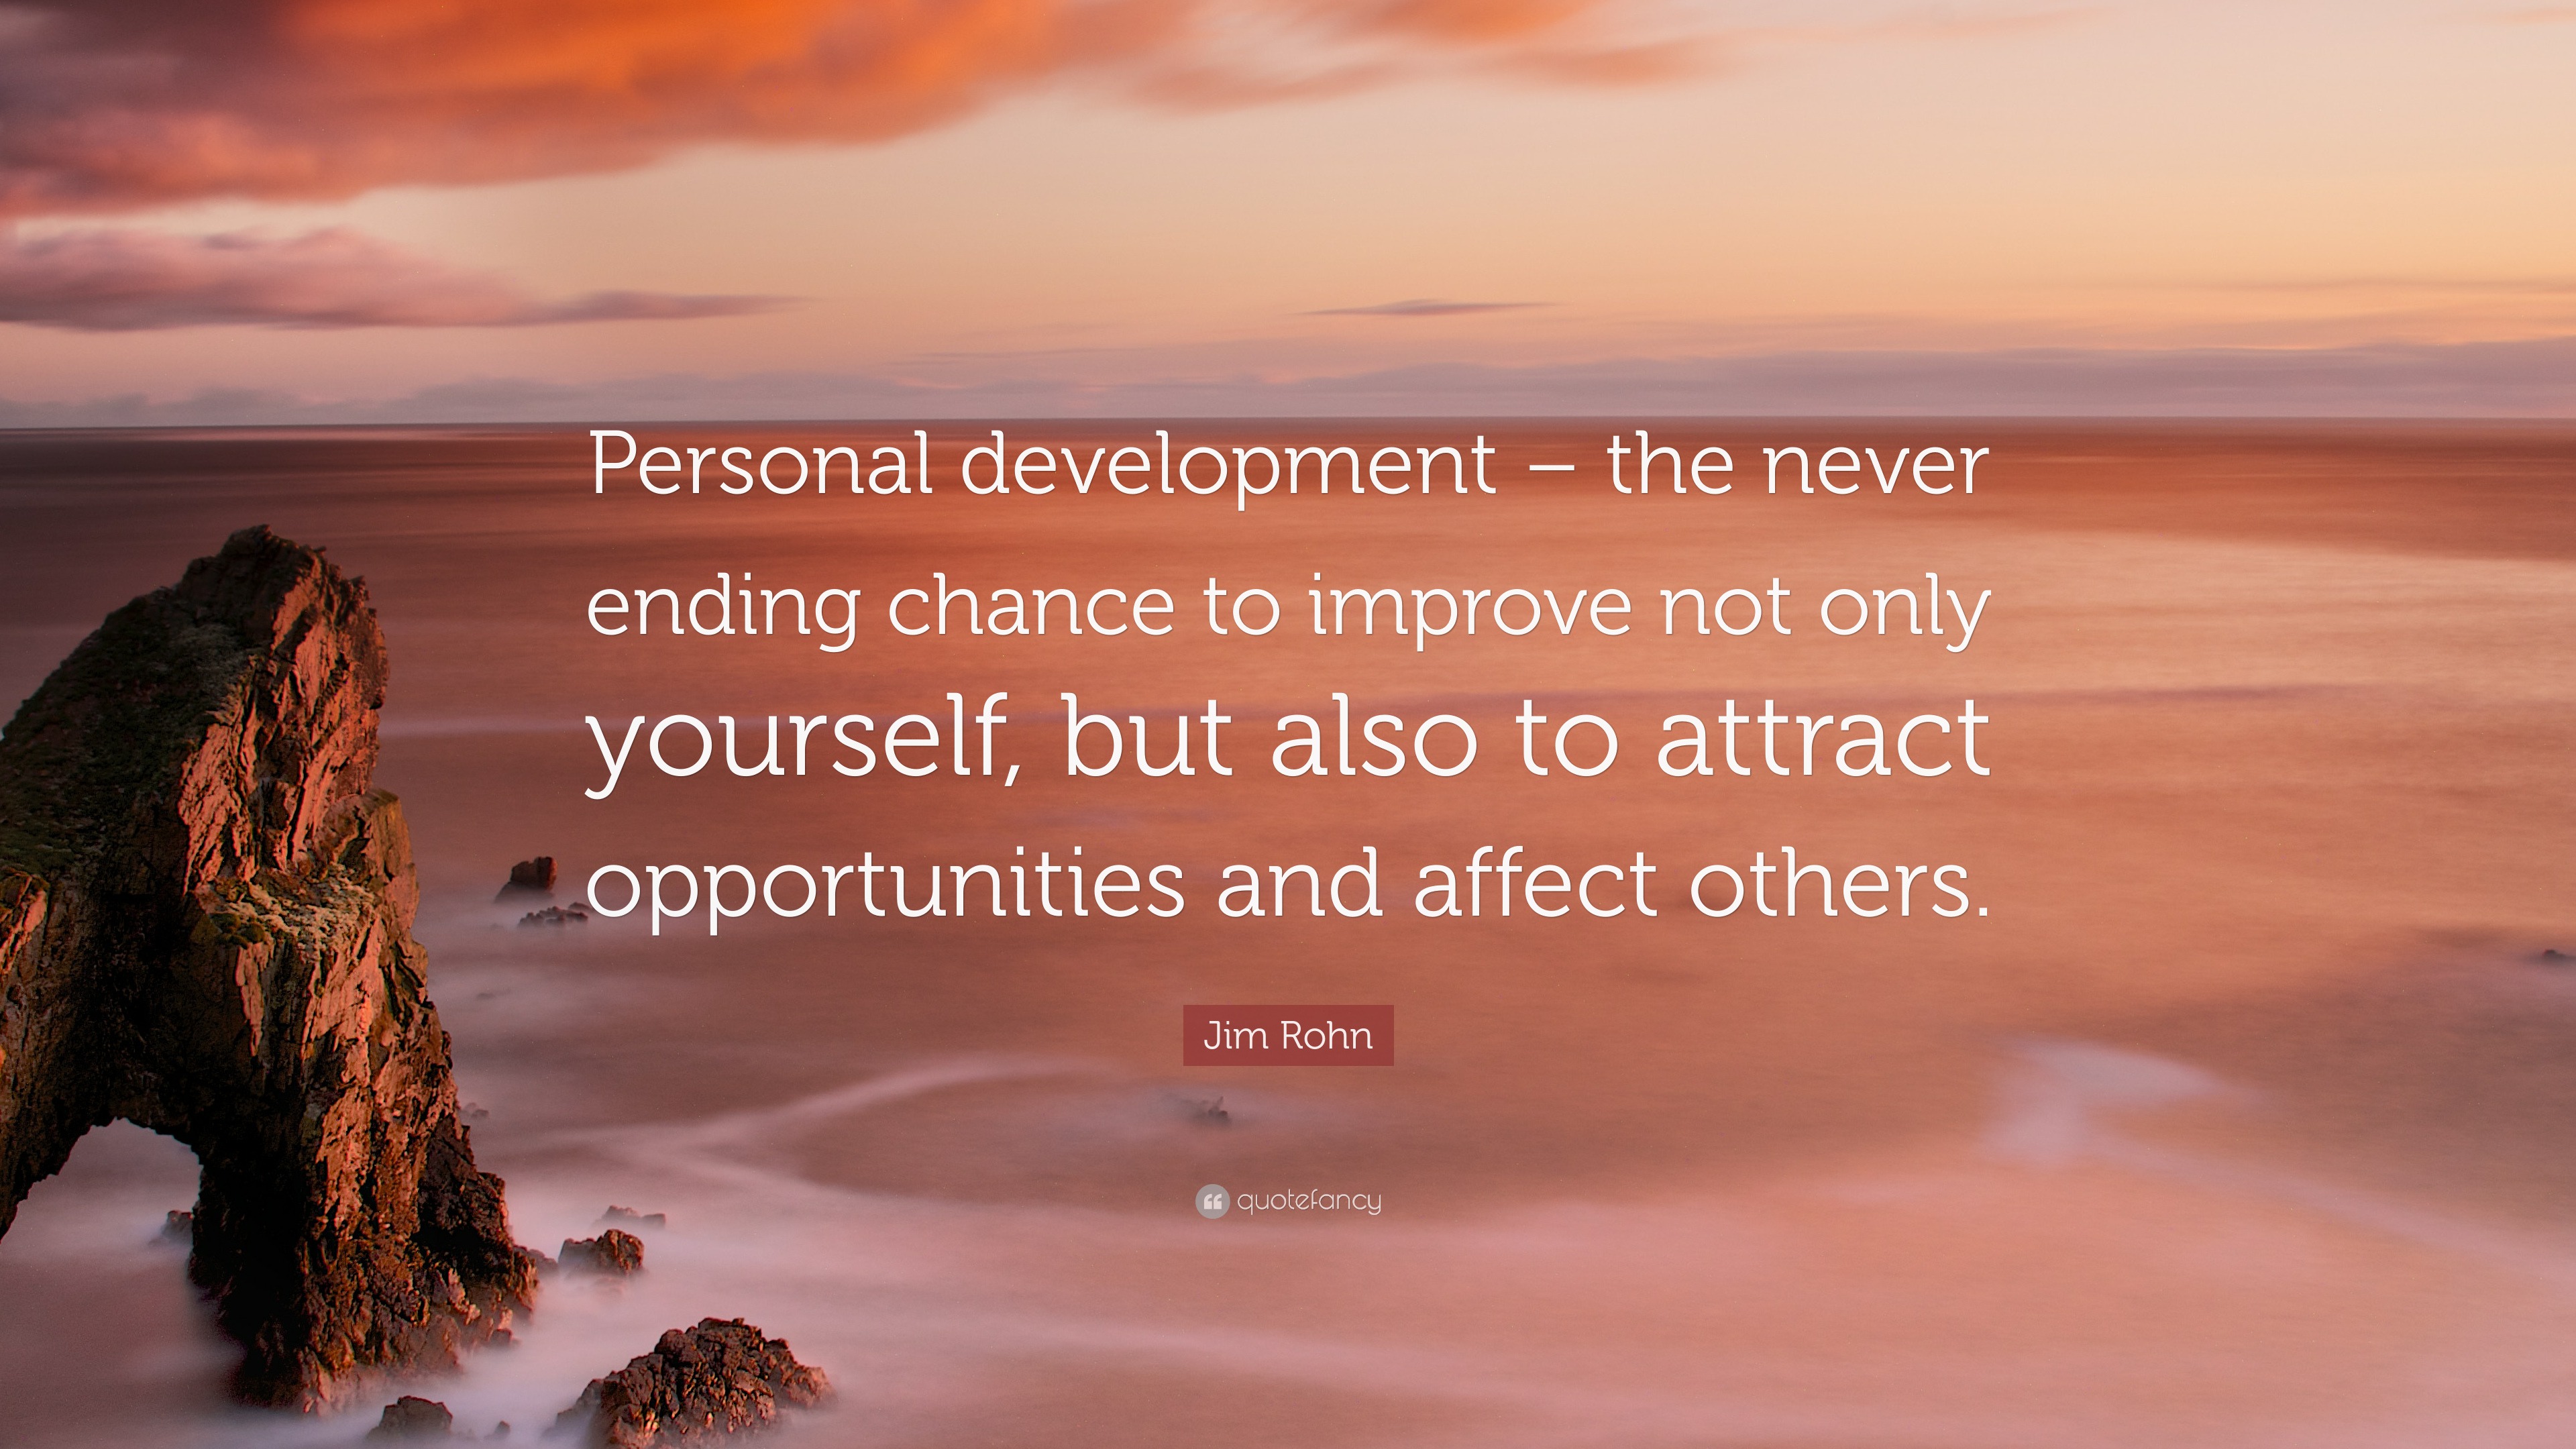 Jim Rohn Quote: “Personal development – the never ending chance to